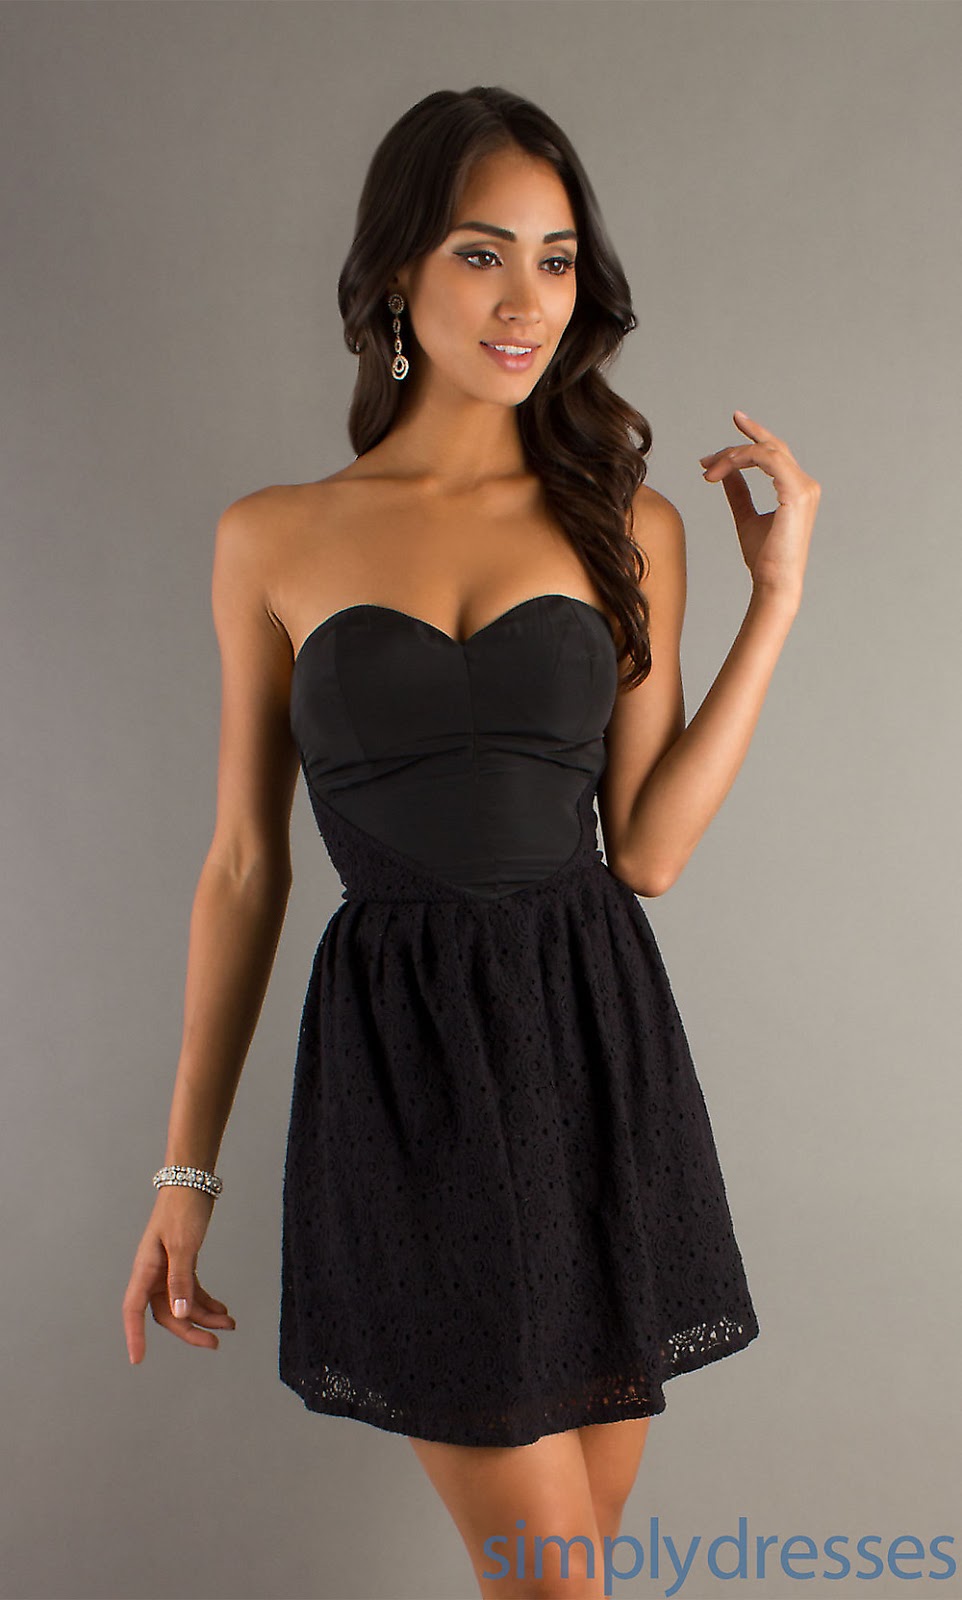 Black Dresses Ideas For Women’s Just For Fun